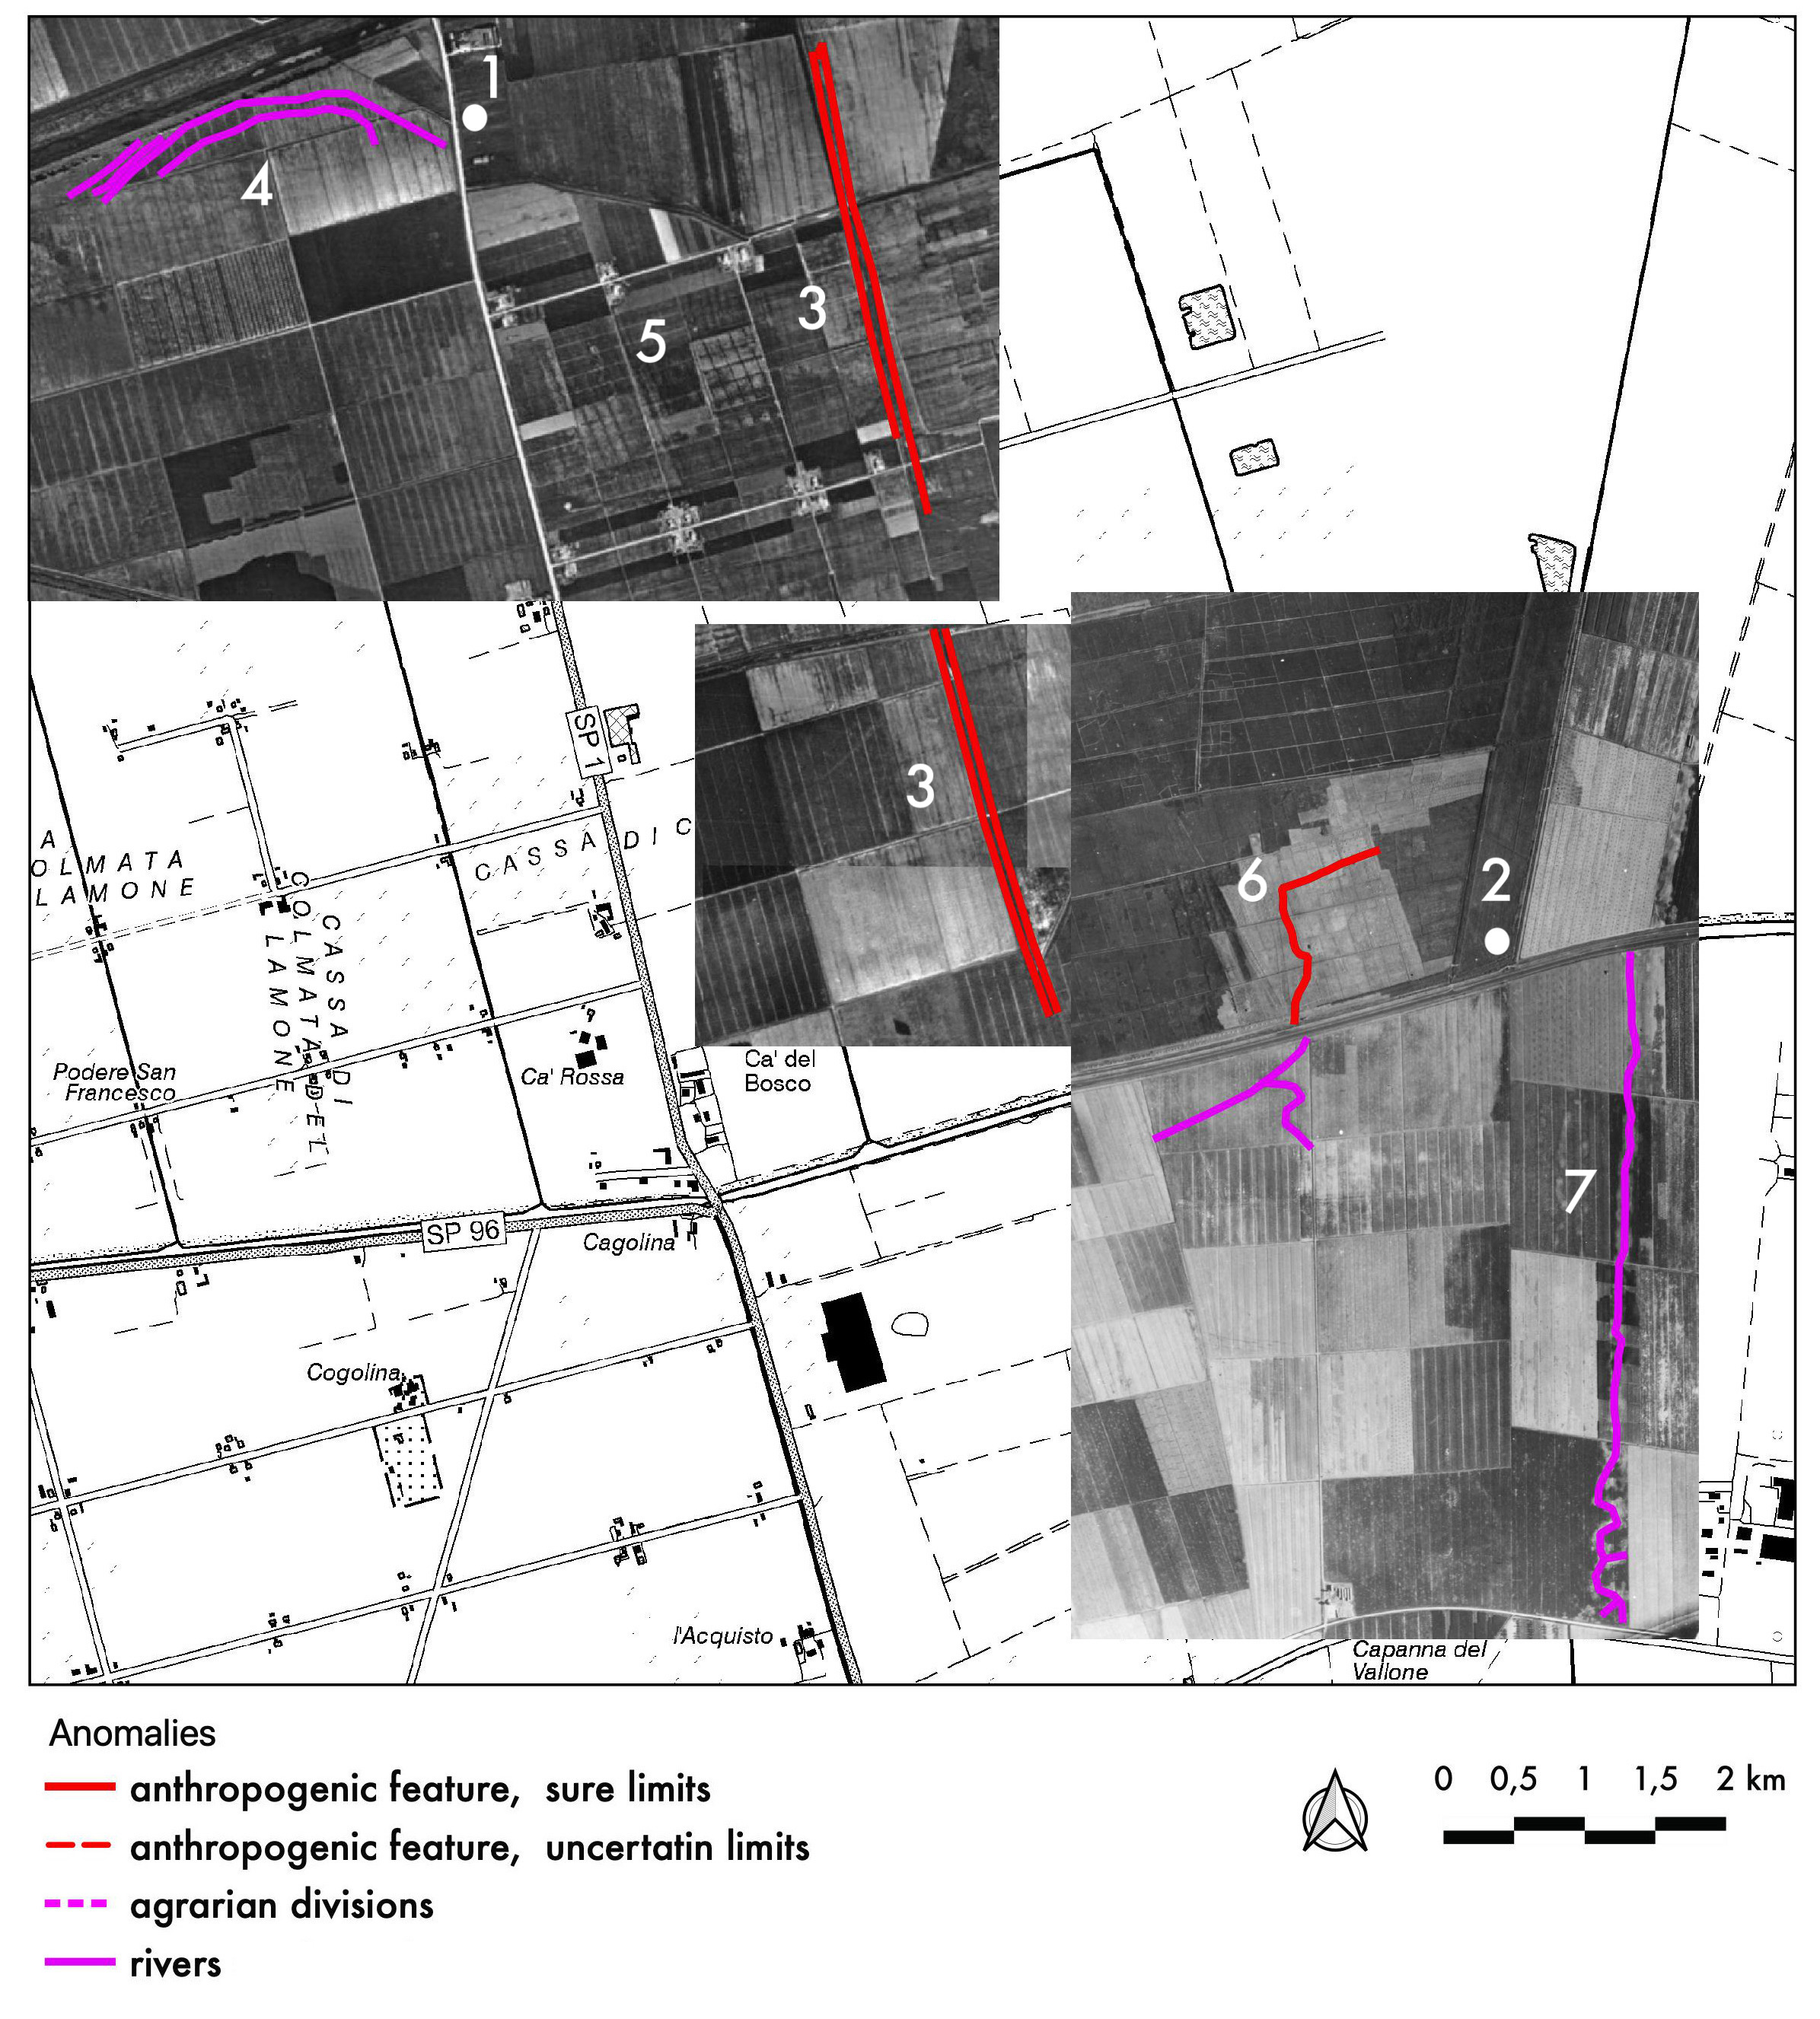  Figure 12. Highlighting of main anomalies near the area of S. Pietro in Armentario (no. 1) and the area of Palazzolo (no. 2): the Padoreno channel (no. 3); fluvial meander (no. 4); rice paddies (no. 5); trail path (no. 6); swale (no. 7). Author M. Cavalazzi. 